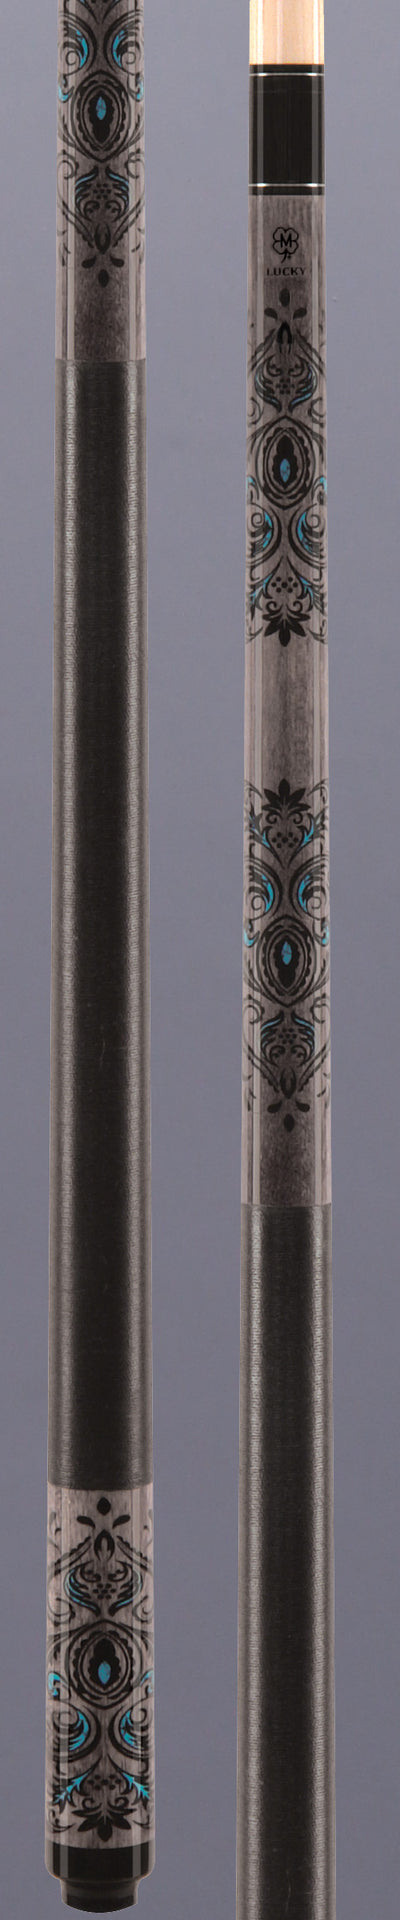 Lucky L51 Black Turquoise Cue